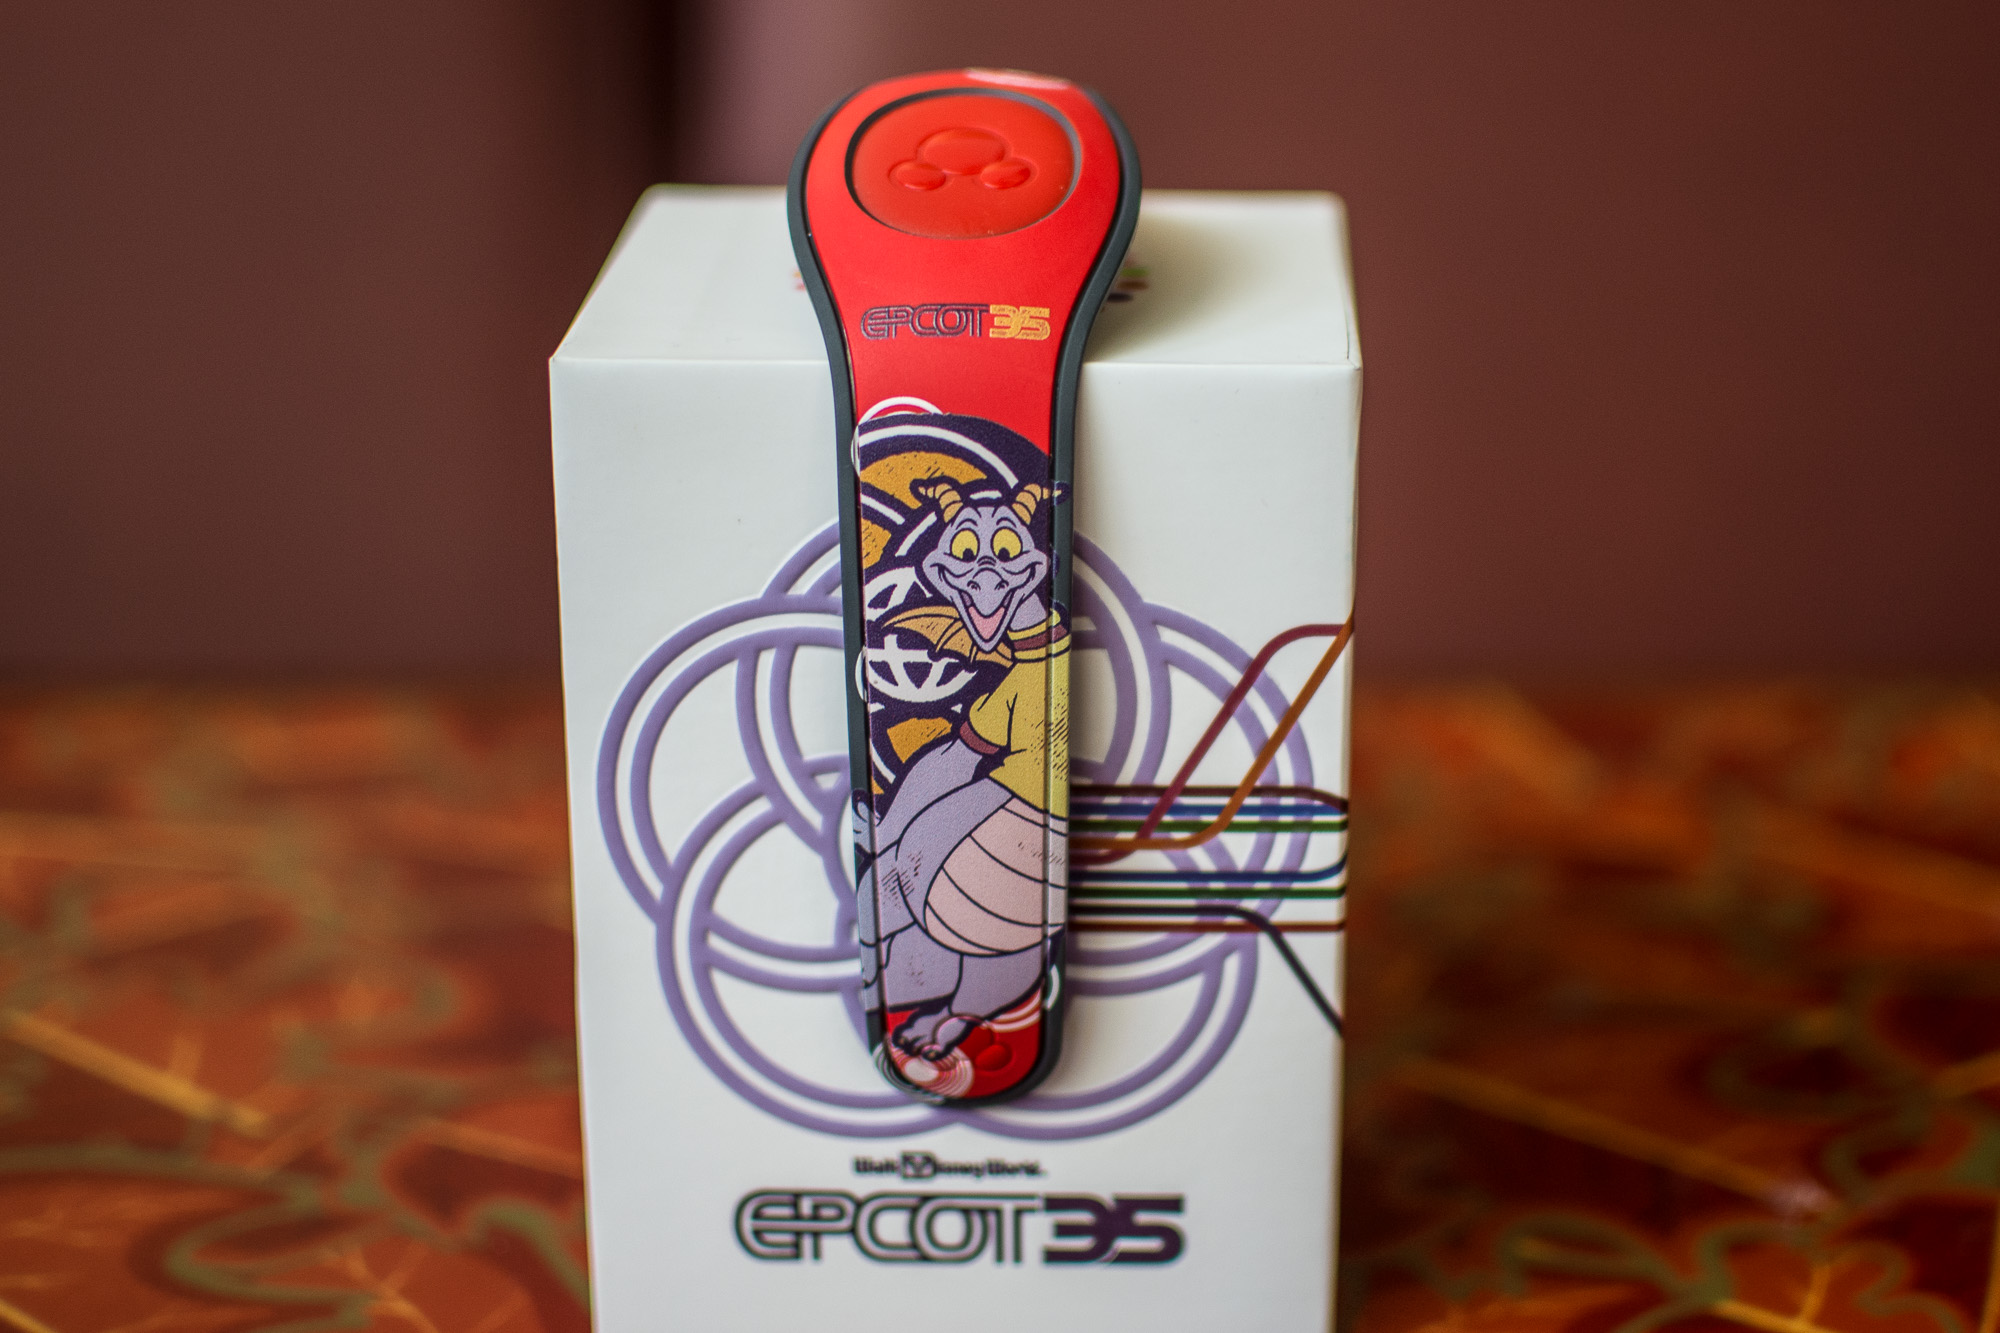 Surprise Epcot 35th Anniversary MagicBand Released Featuring Figment